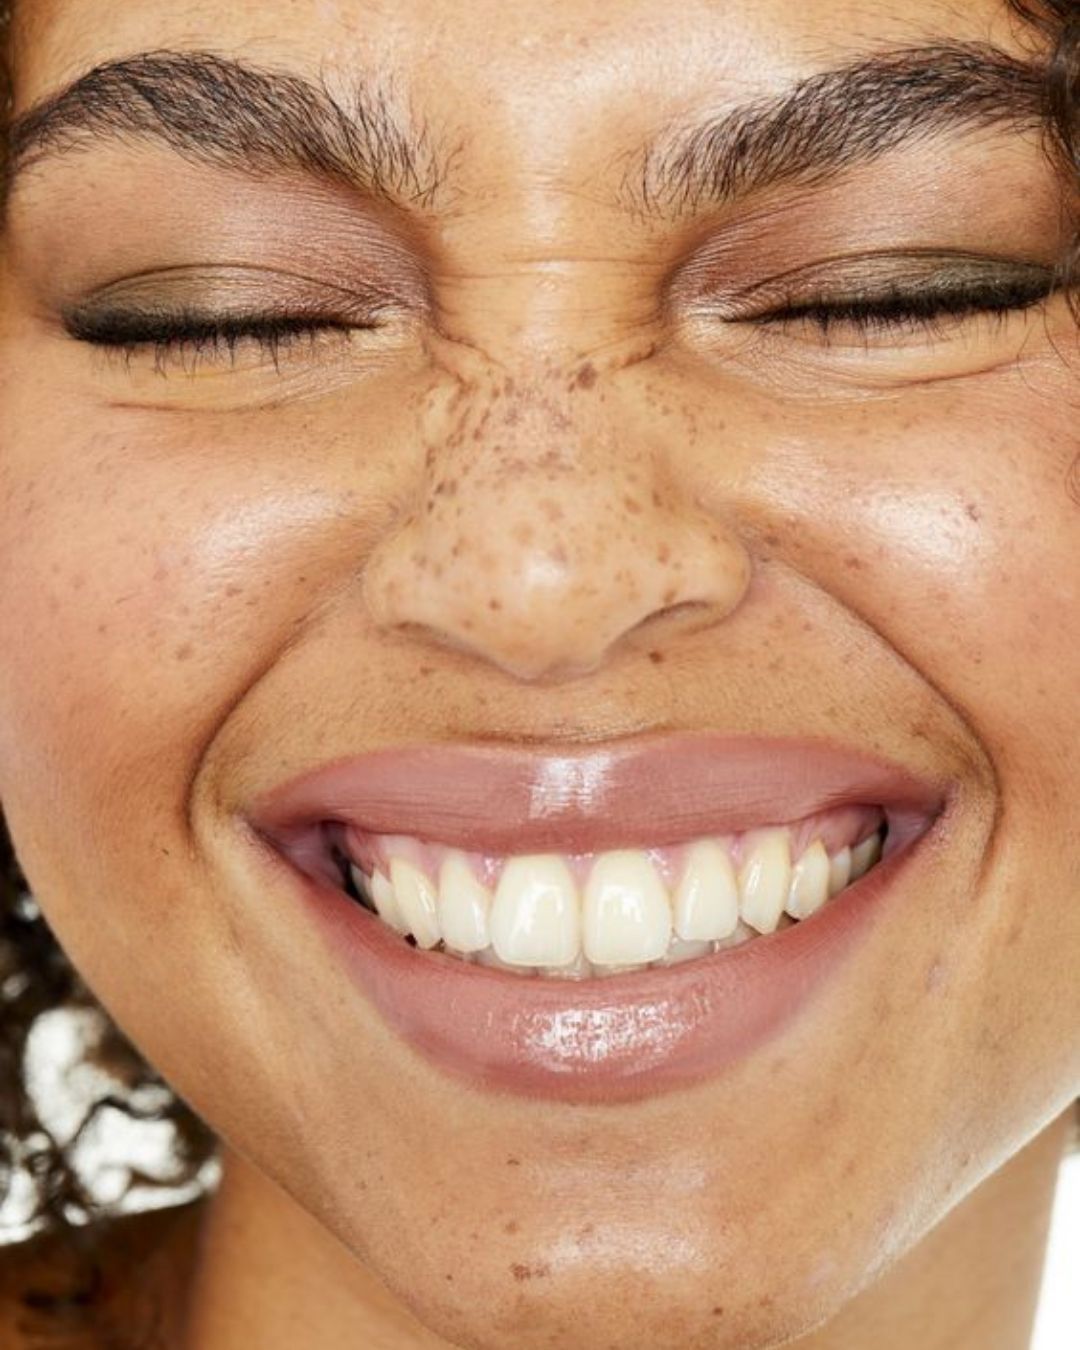 It's sunny: beware of hyperpigmentation A few tips on how to prevent and minimize dark spots